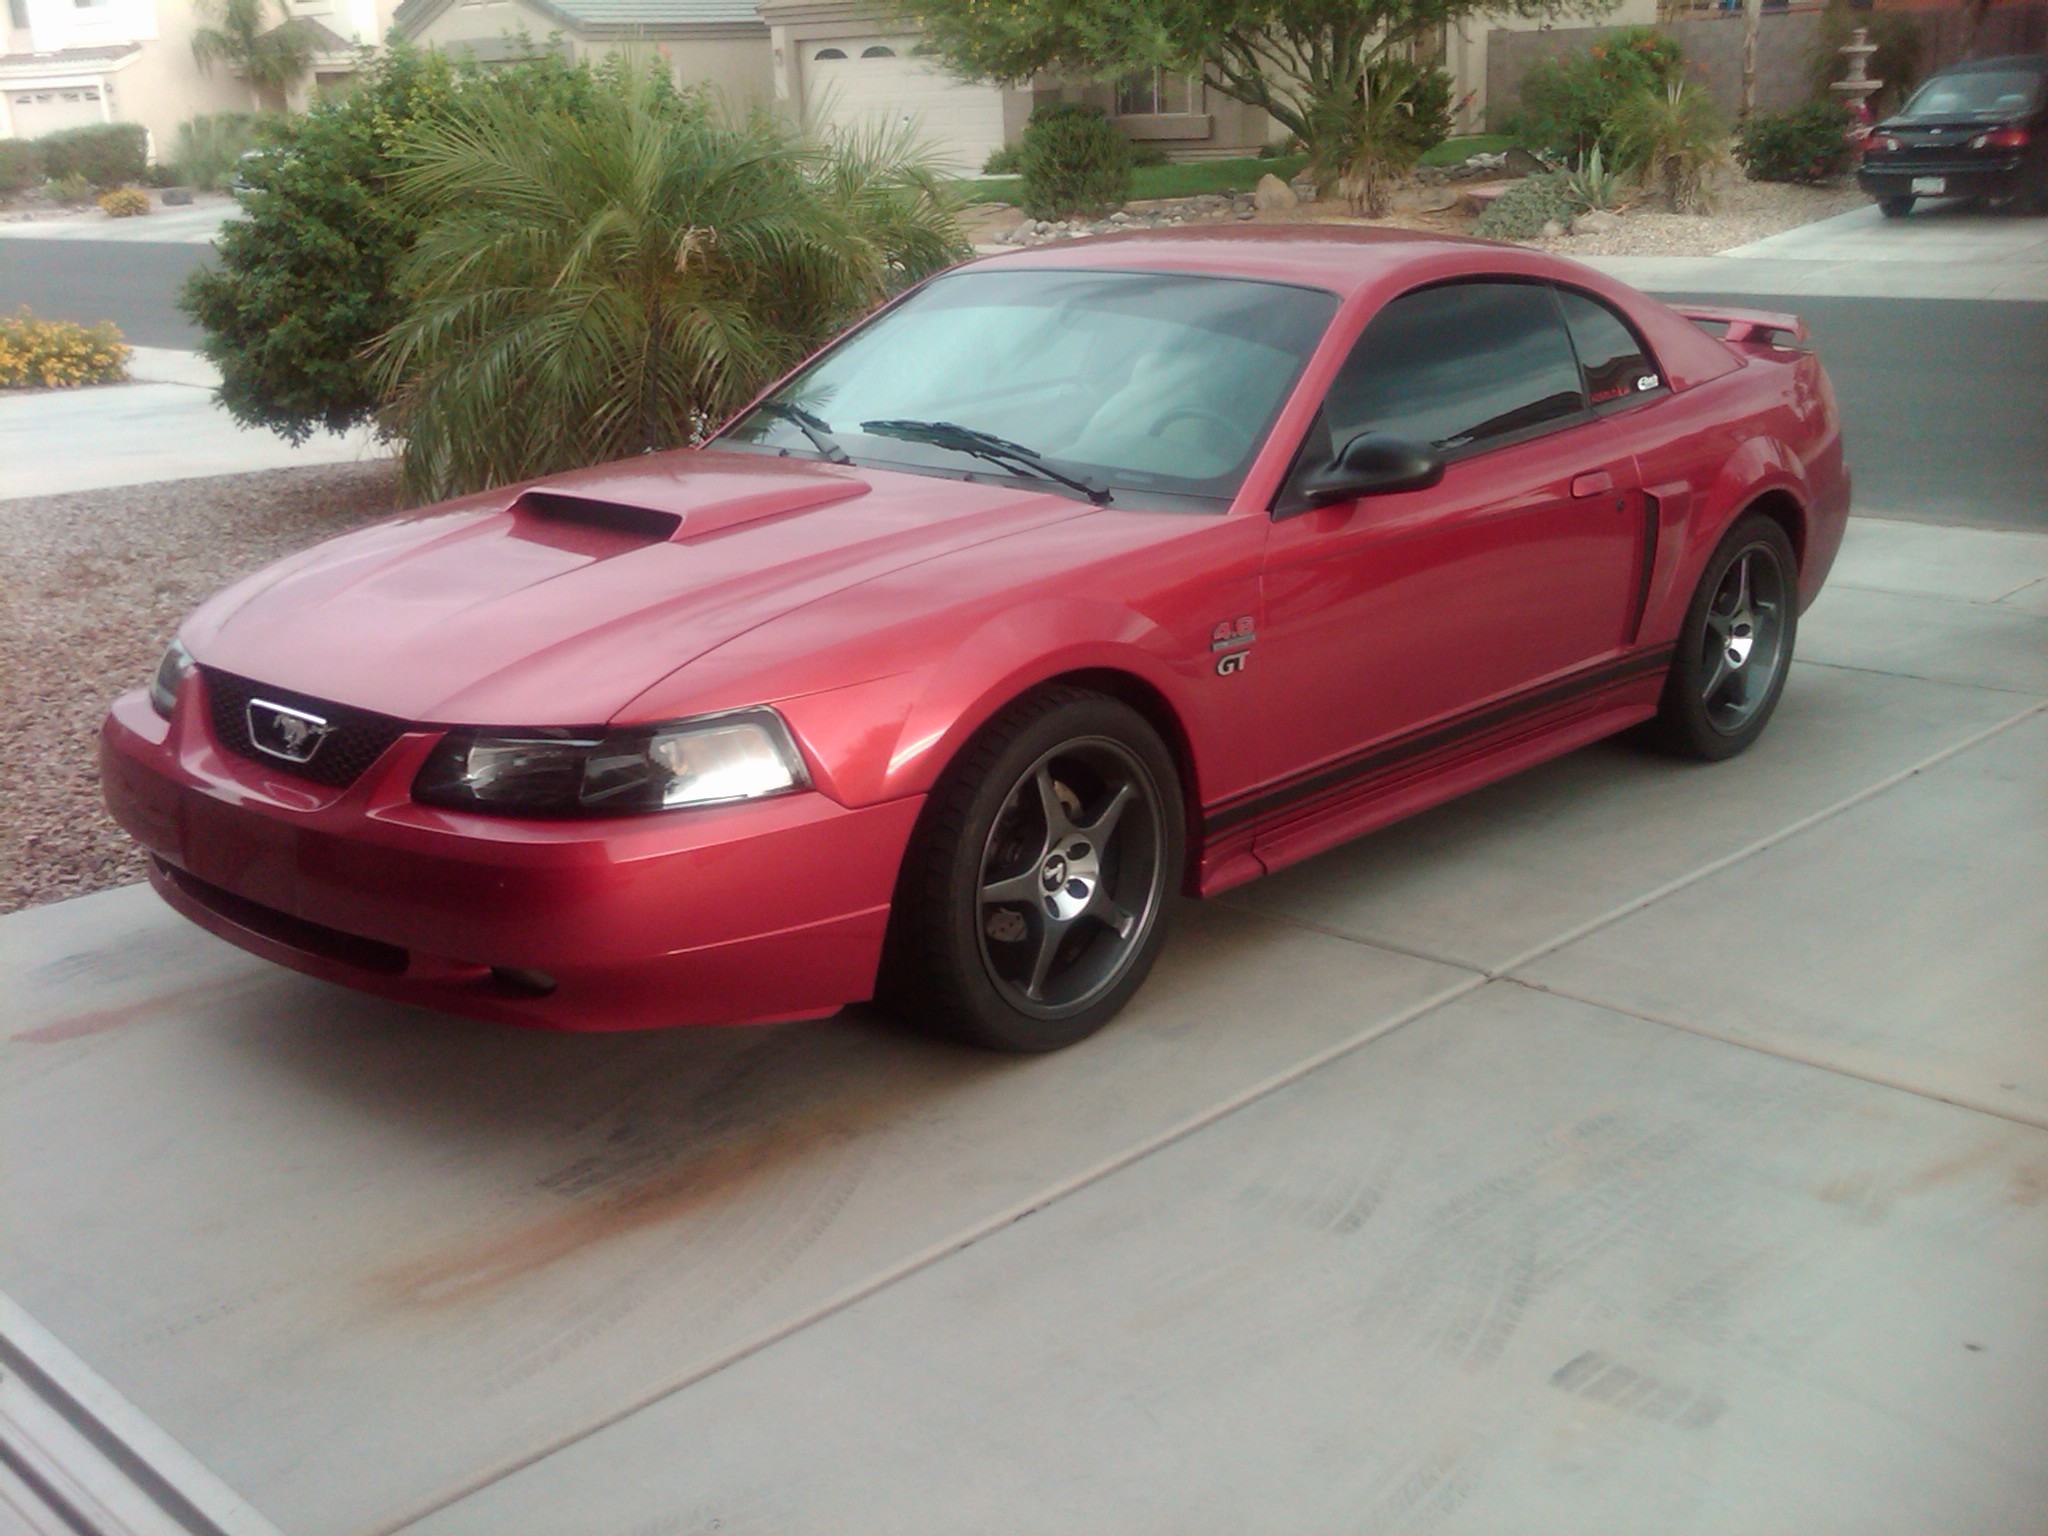 2001 Ford mustang gt quarter mile time #8